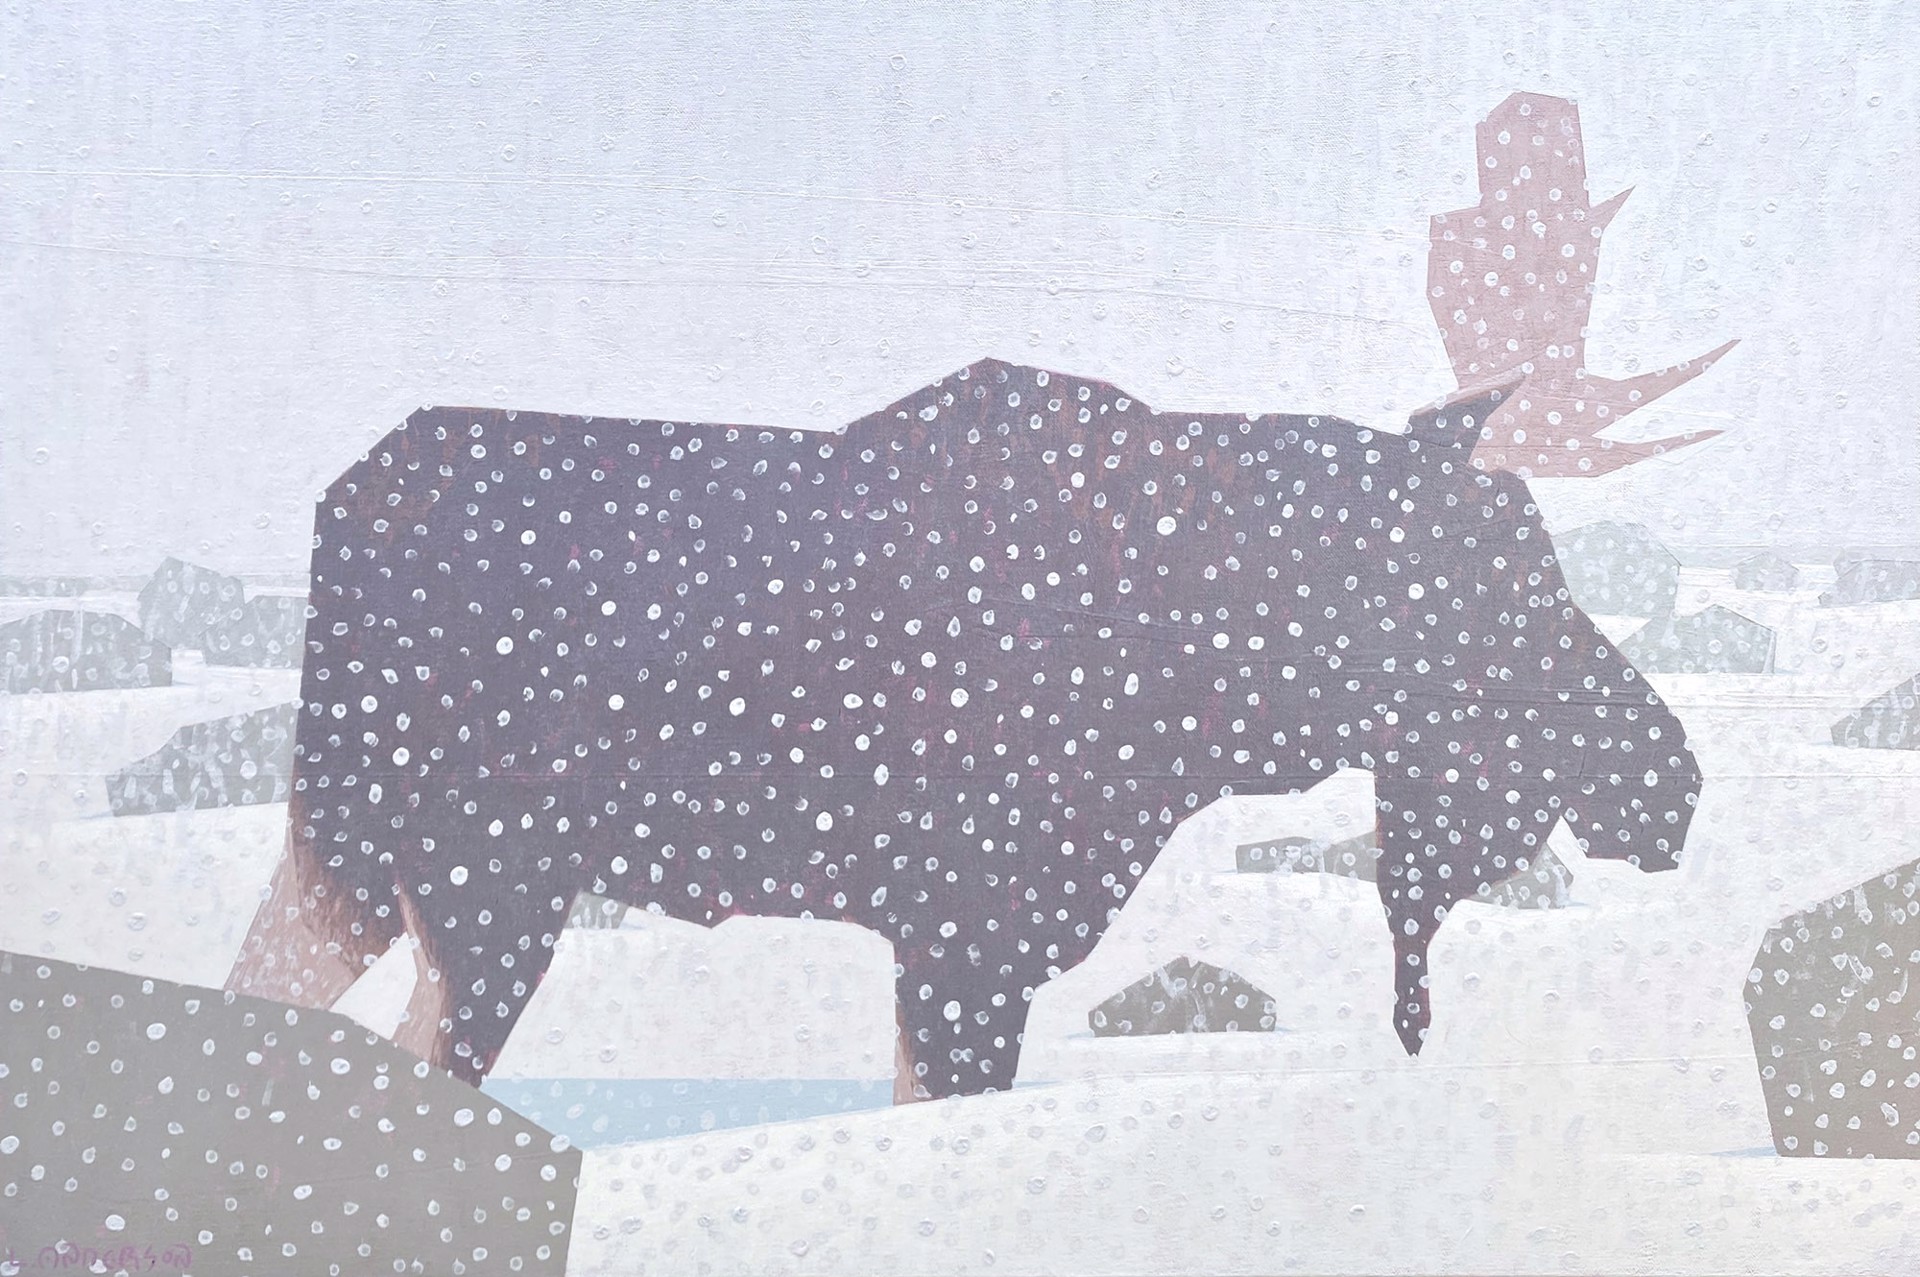 Original Oil Painting By Luke Anderson Featuring A Moose Through Falling Snow